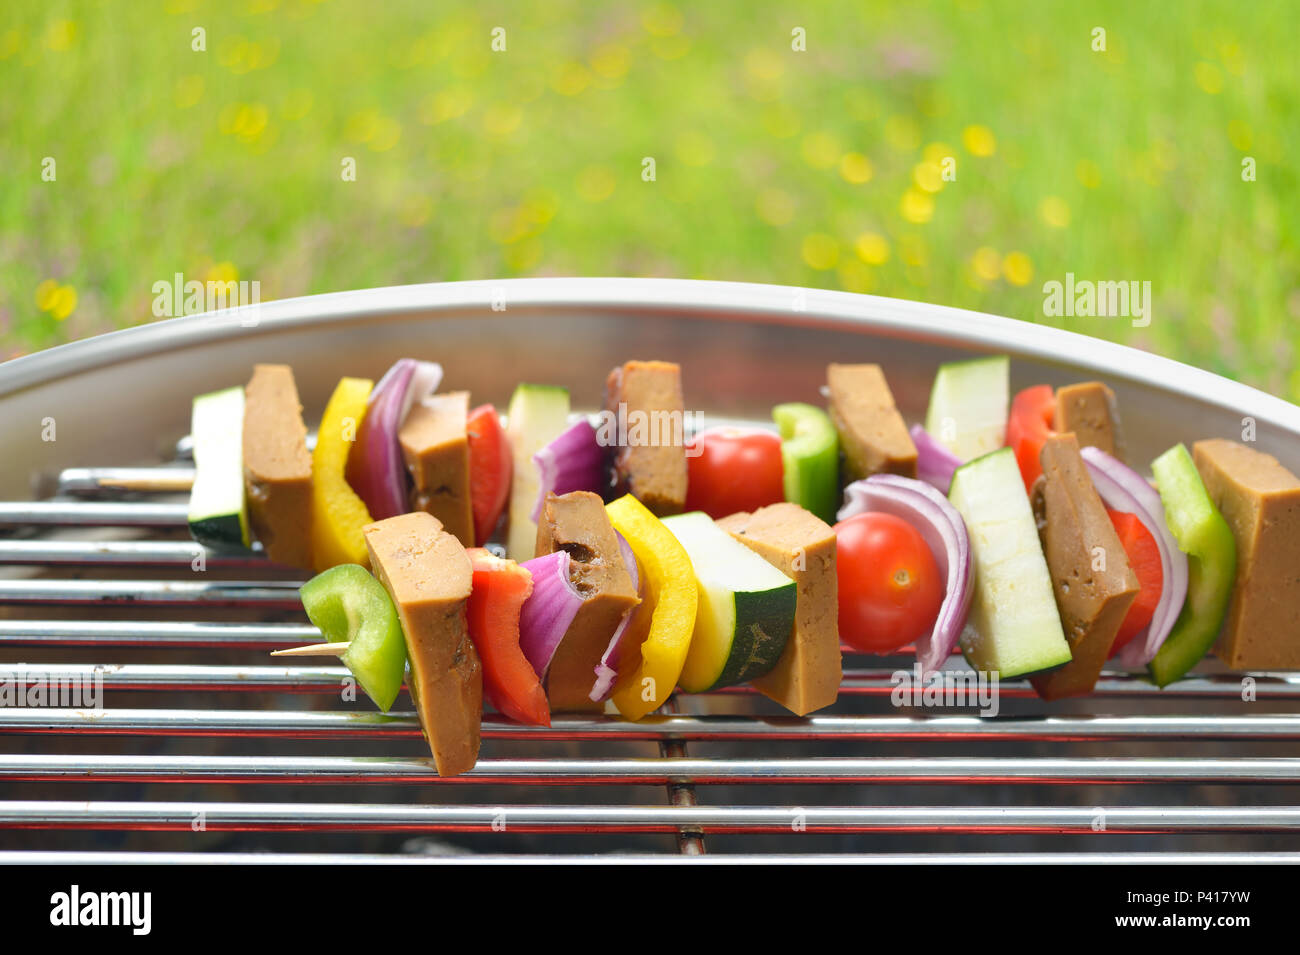 Meatless grilling: Vegetarian skewers with seitan and mixed vegetables on a grill Stock Photo